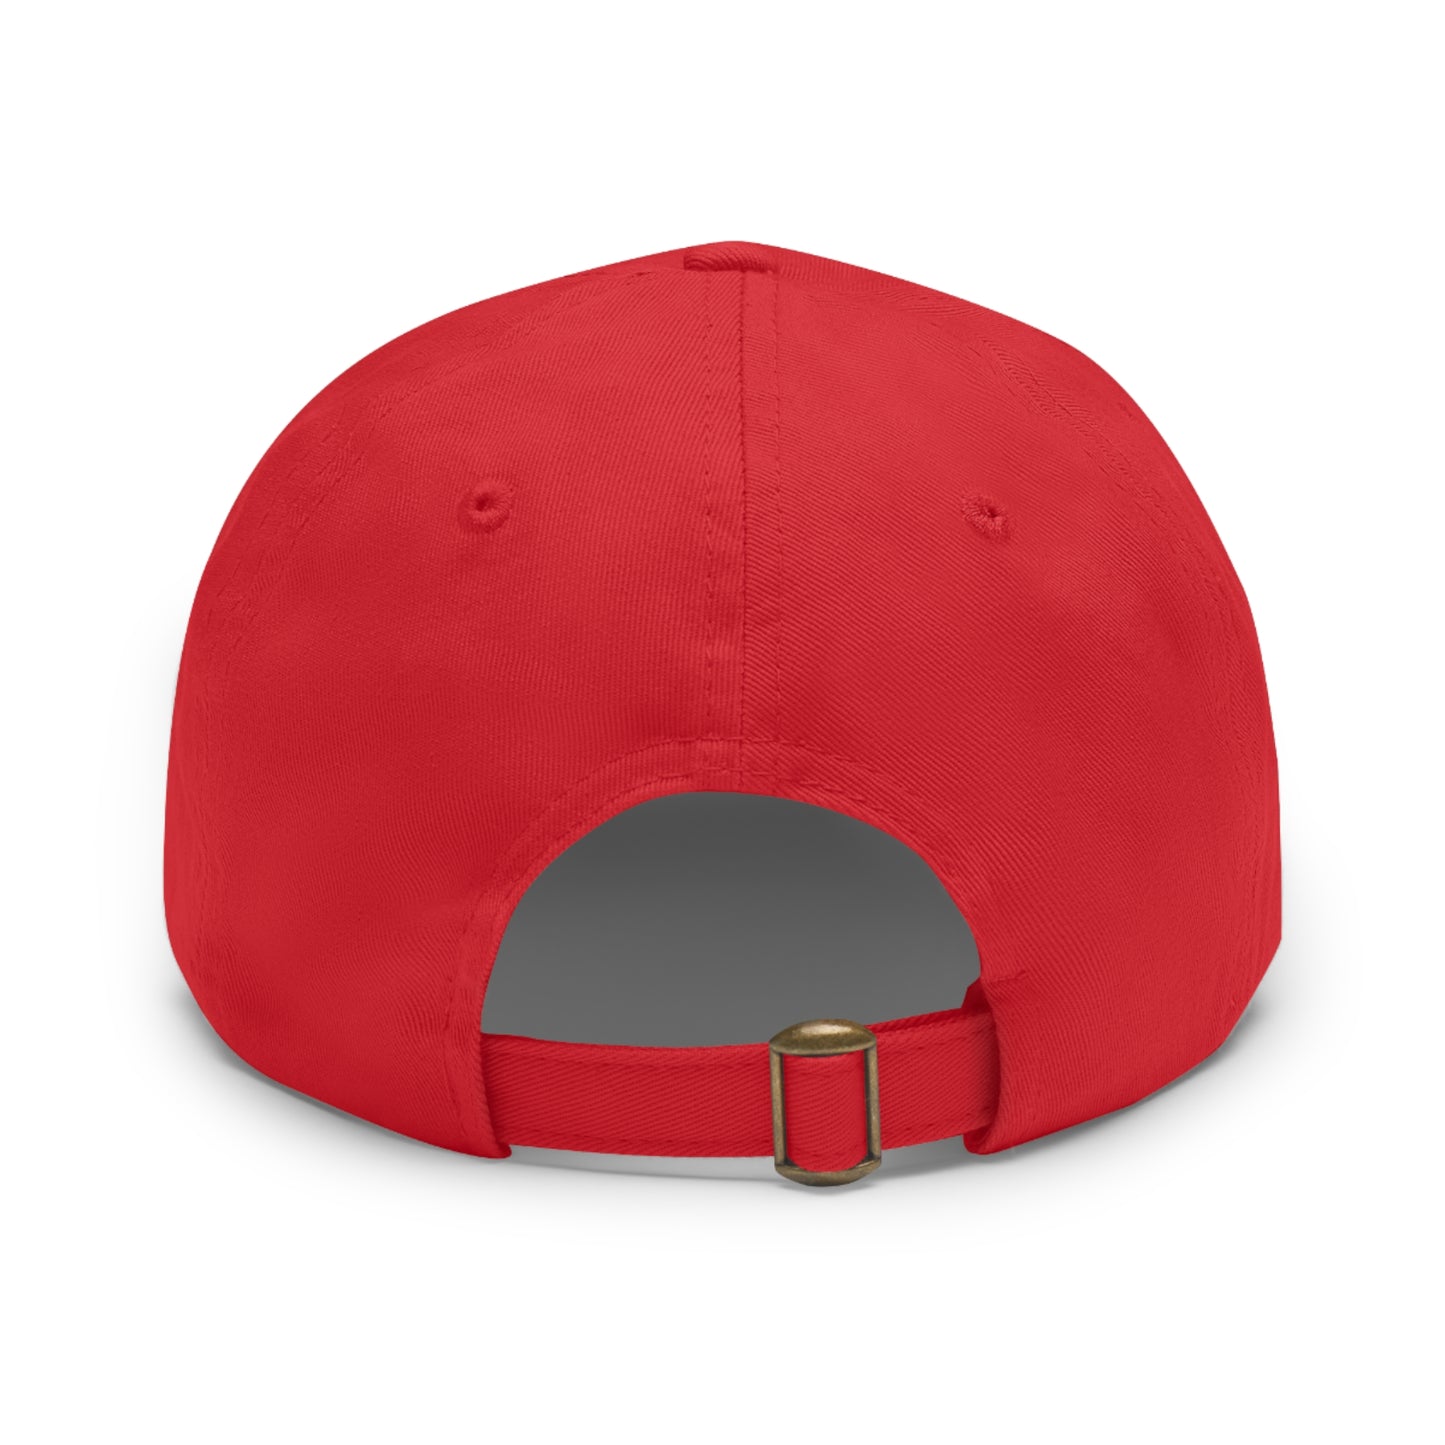 Red 47 Hat with Leather Patch